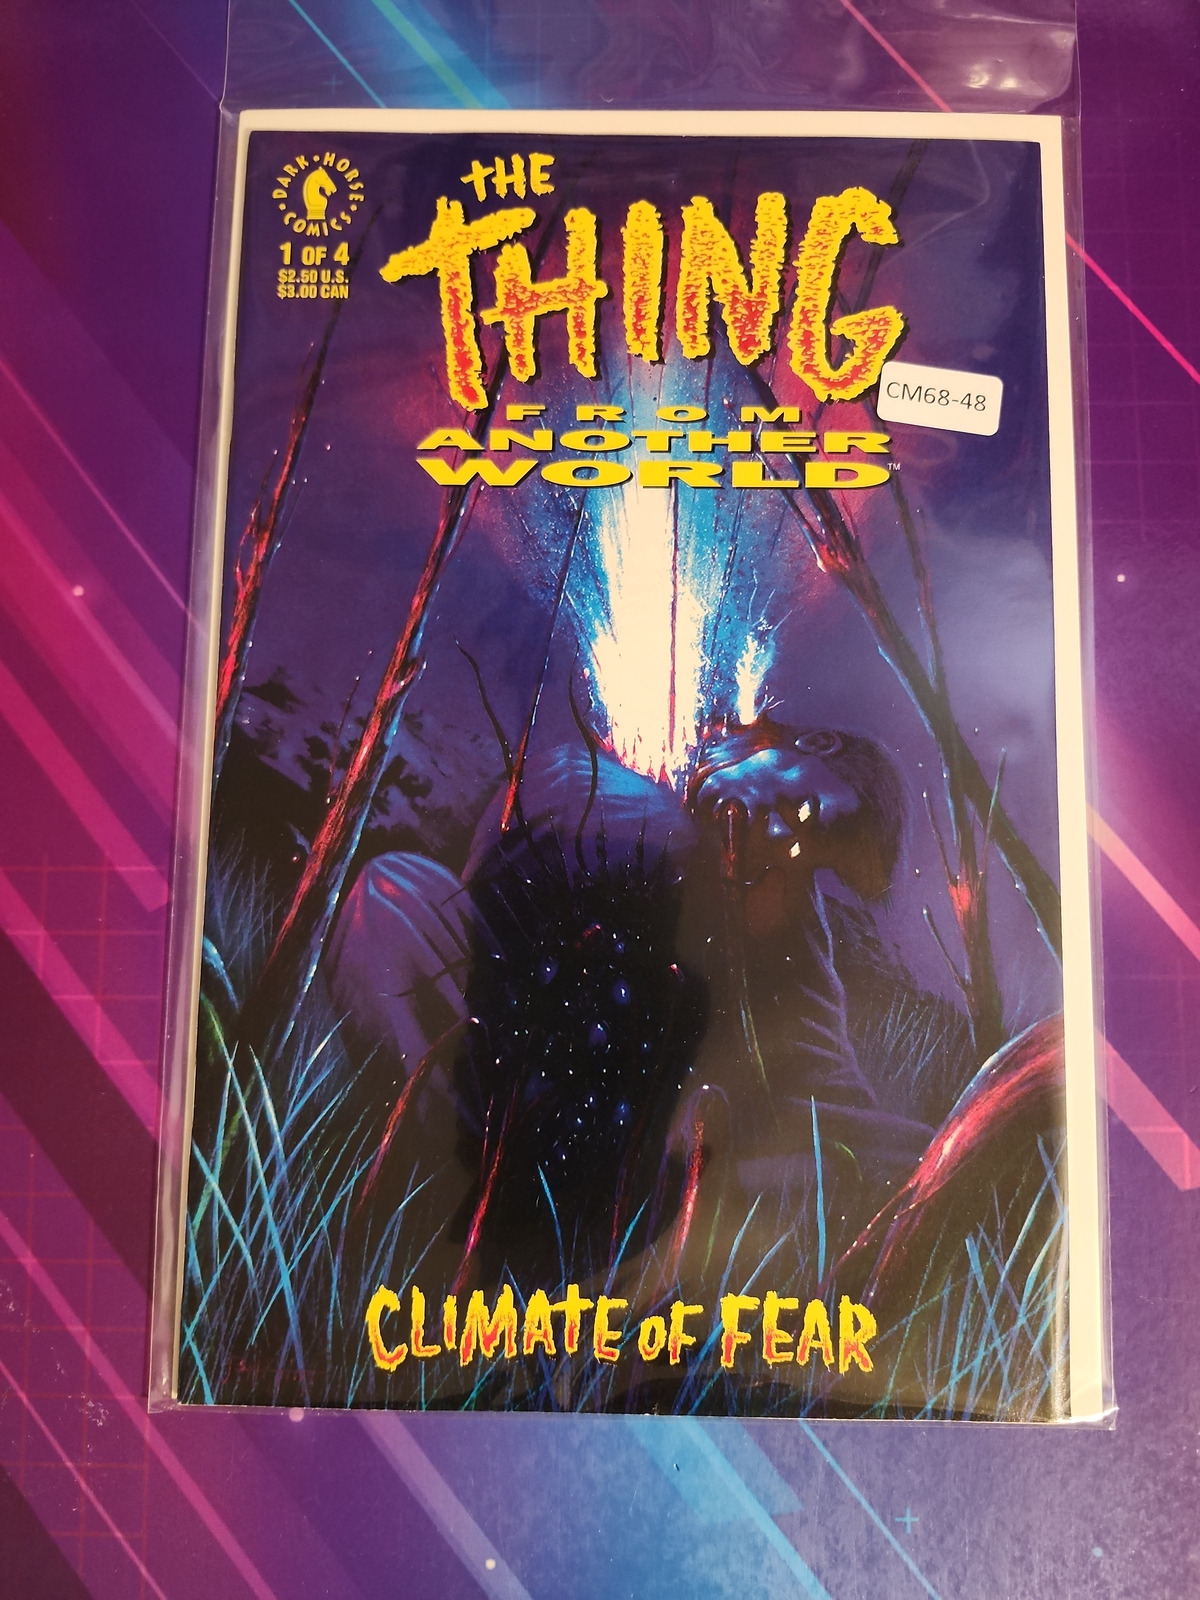 THE THING FROM ANOTHER WORLD: CLIMATE OF FEAR #1 MINI HIGH GRADE CM68-48